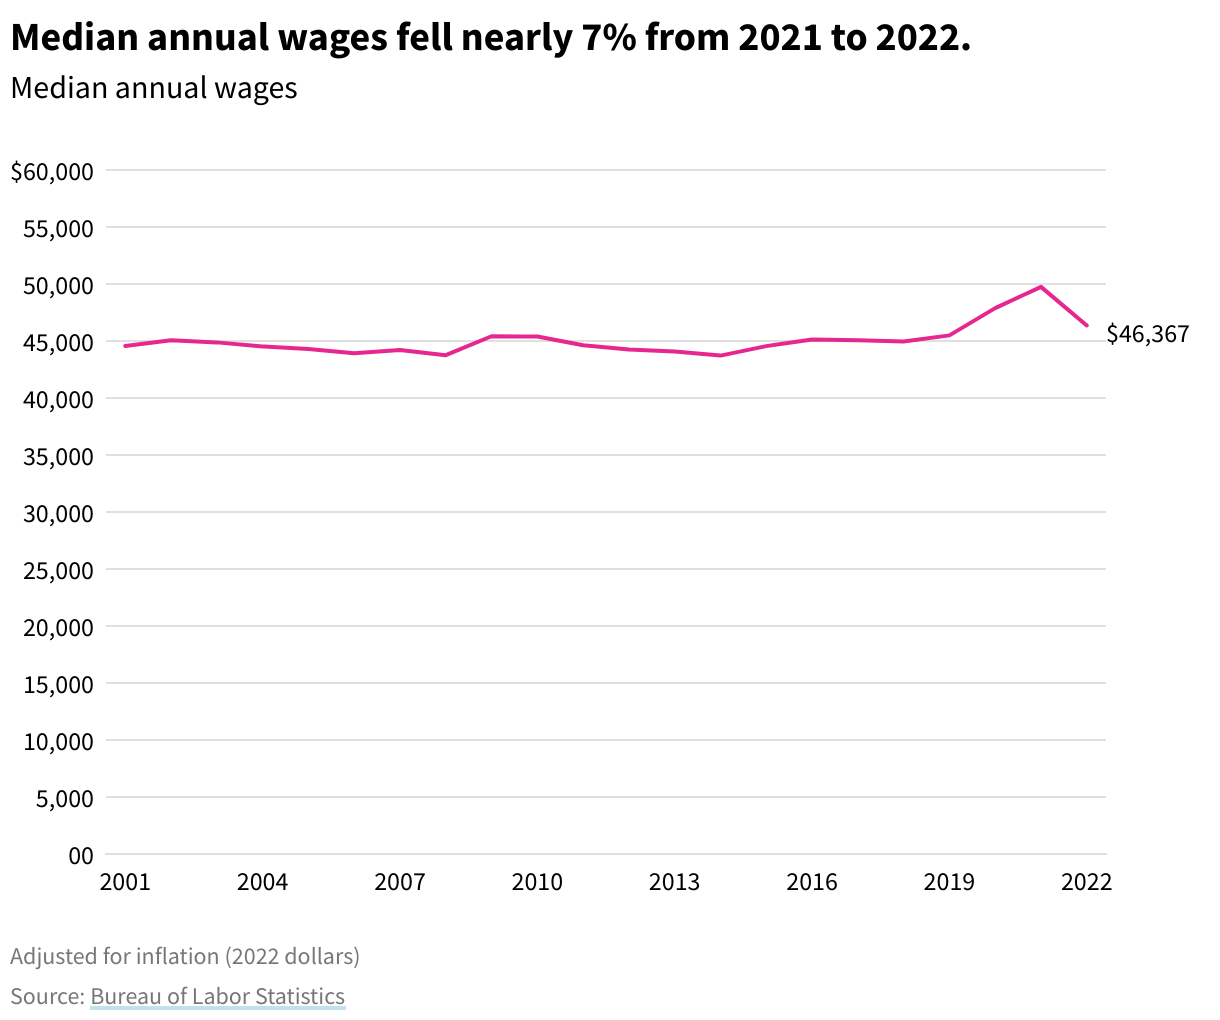 Line chart showing median annual wages adjusted for inflation from 2001 to 2022, which has remained relatively stable. The biggest drop is 7% from the 2021 to 2022. 